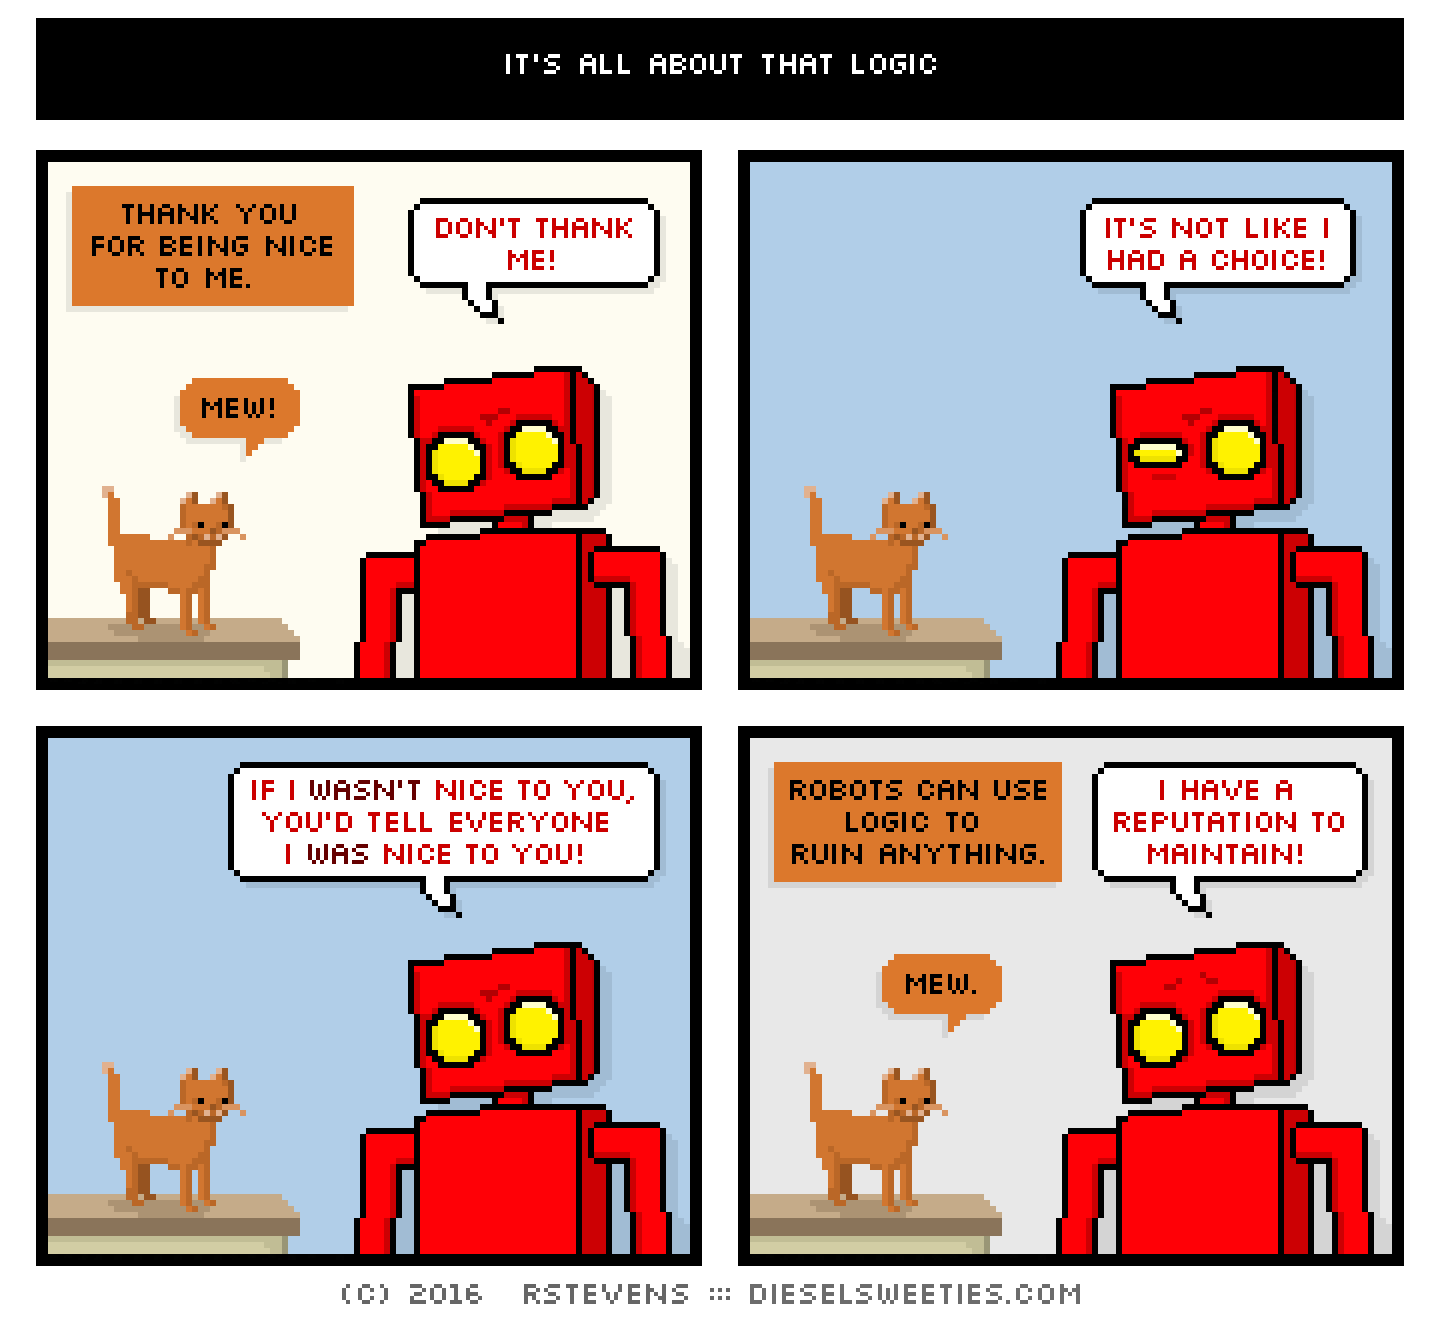 roger the cat, red robot, smile : mew! thank you for being nice to me. don't thank me! it's not like i had a choice! if i wasn't nice to you, you'd tell everyone i was nice to you! robots can use logic to ruin anything. i have a reputation to maintain!